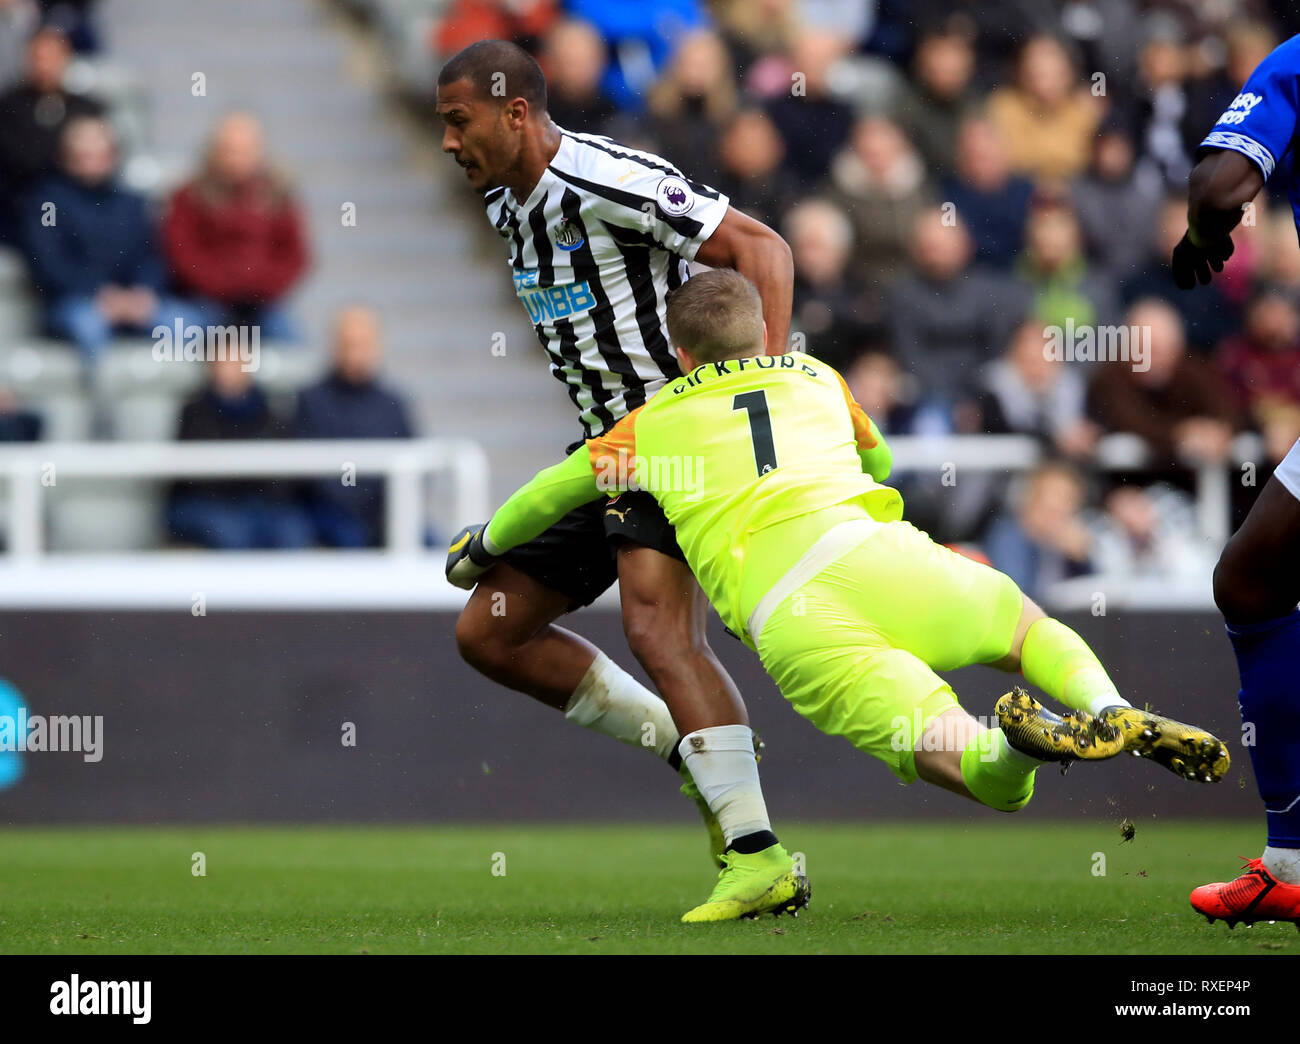 Everton goalkeeper Jordan Pickford brings Newcastle United's Salomon Rondon to a penalty during the Premier League match at St James' Park, Newcastle Stock Photo - Alamy